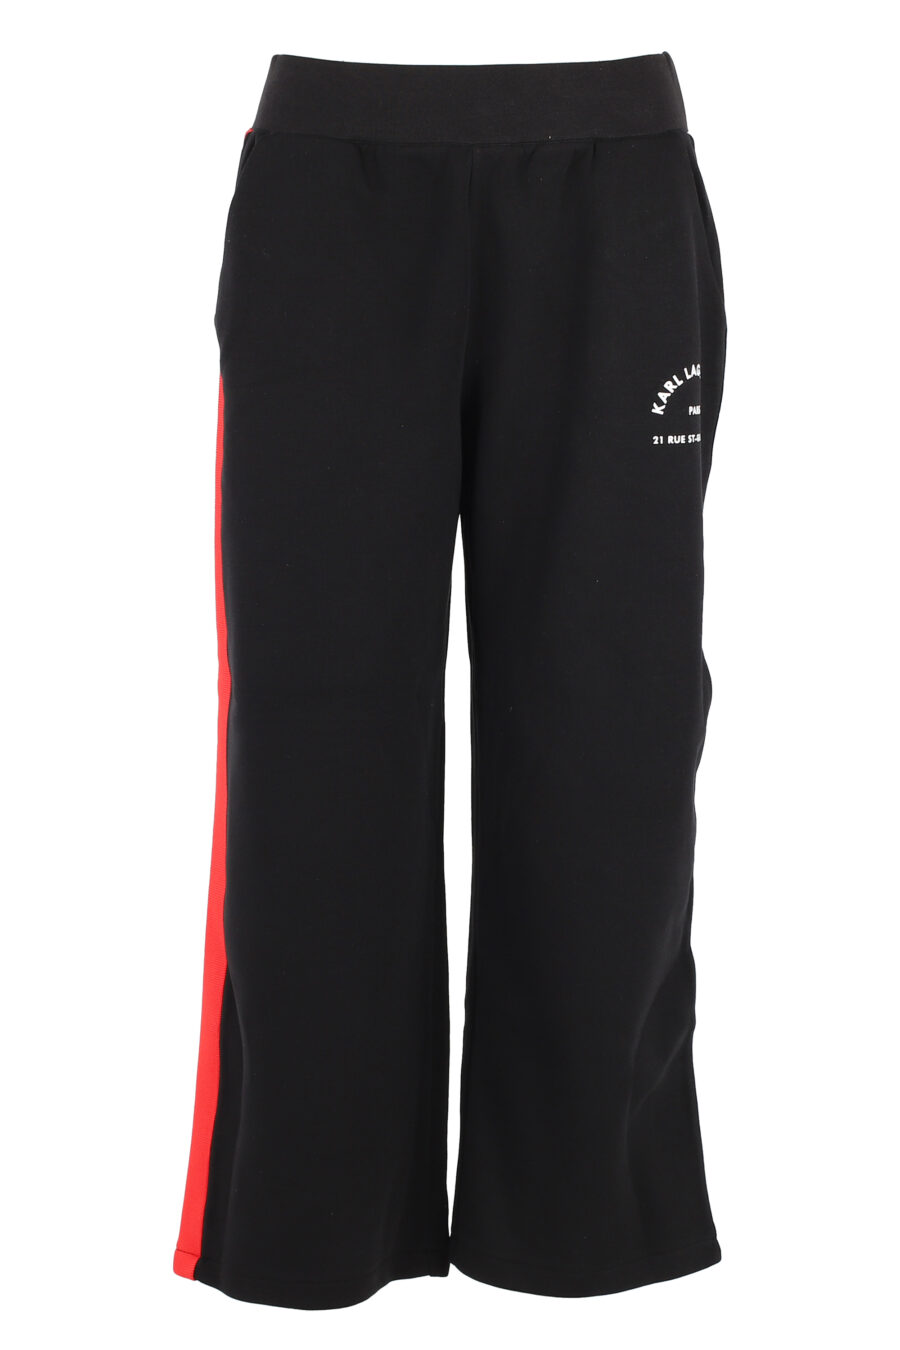 Tracksuit bottoms black with multicoloured side stripes - IMG 5050